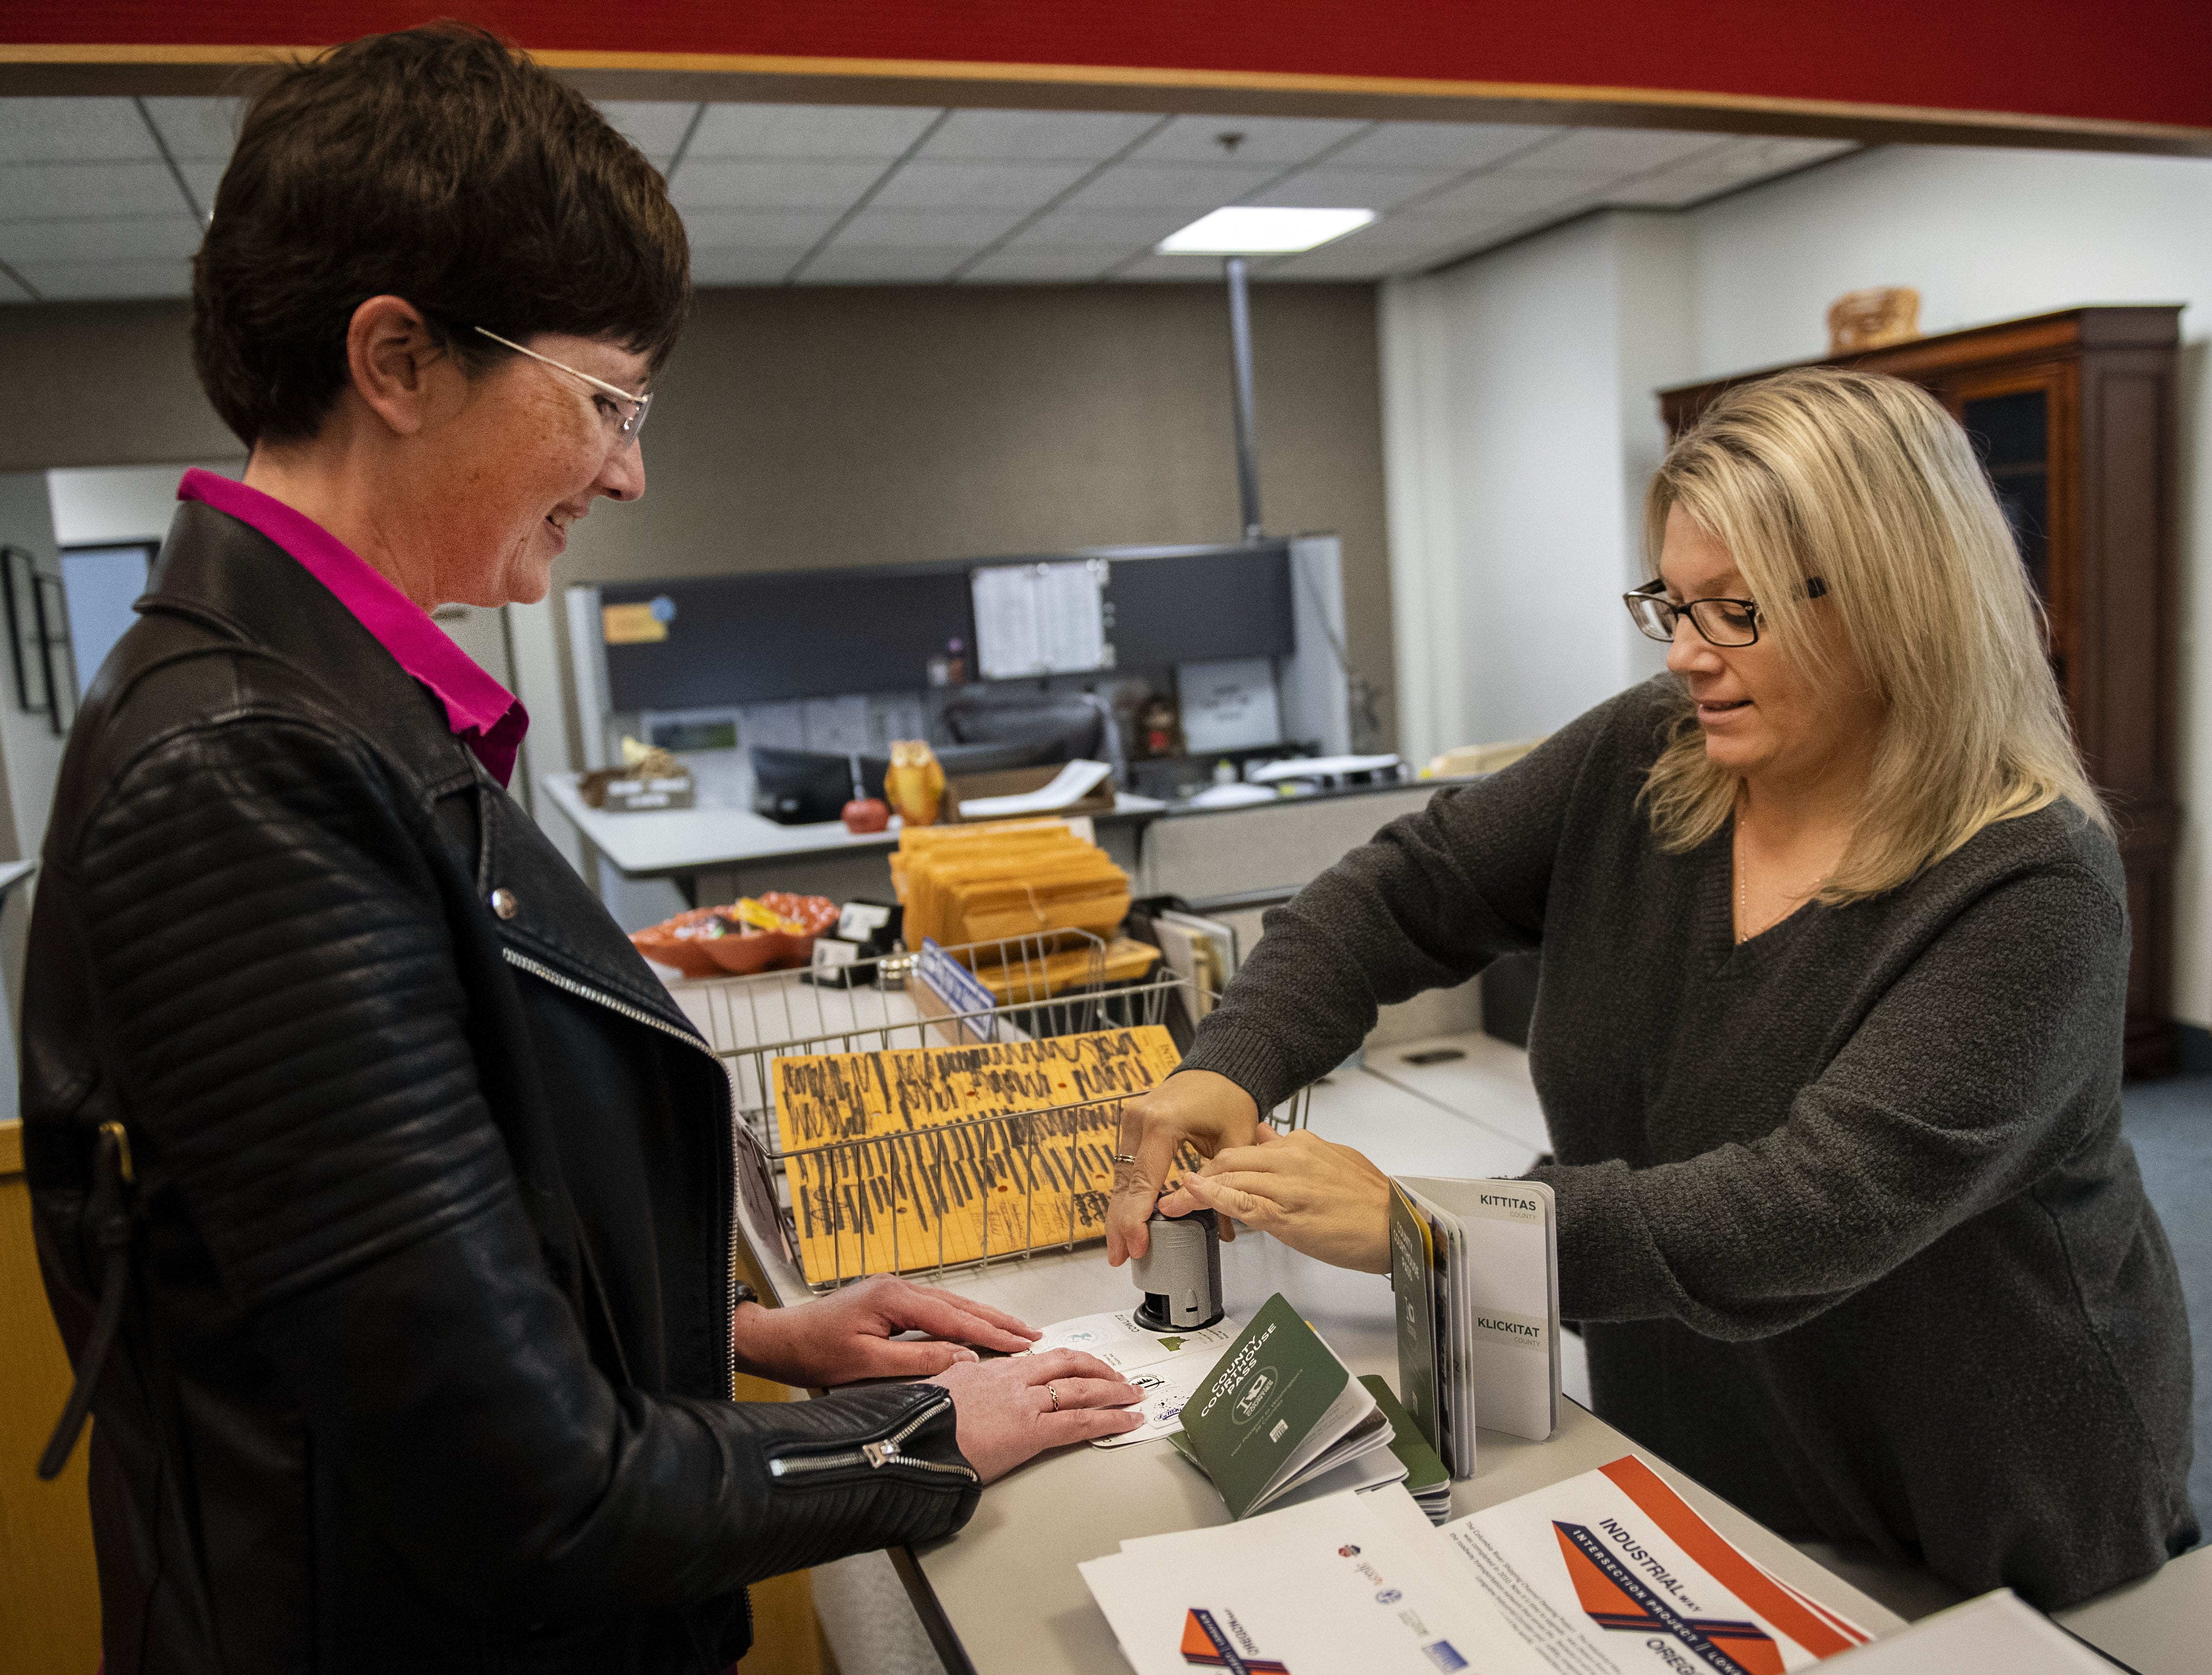 Winlock resident Lindsey Pollock, left, receives her final stamp in her completed Washington county passport from assistant clerk Lisa Huckleberry at the Cowlitz Commissioner in Kelso Monday afternoon.